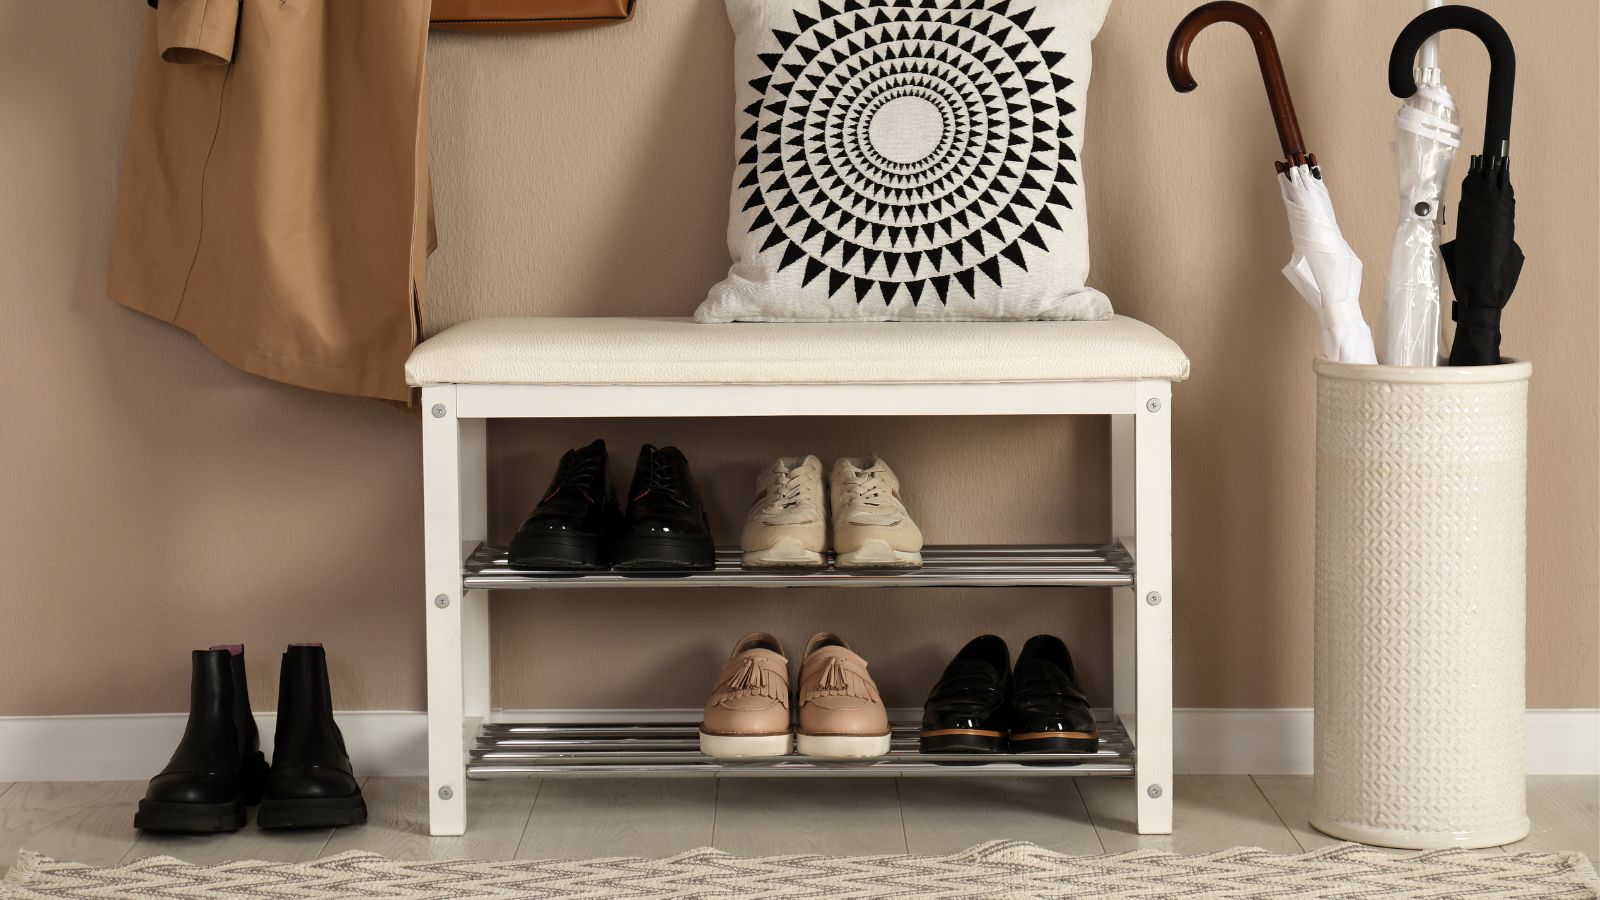 How to organize shoes in a small space, according to pros